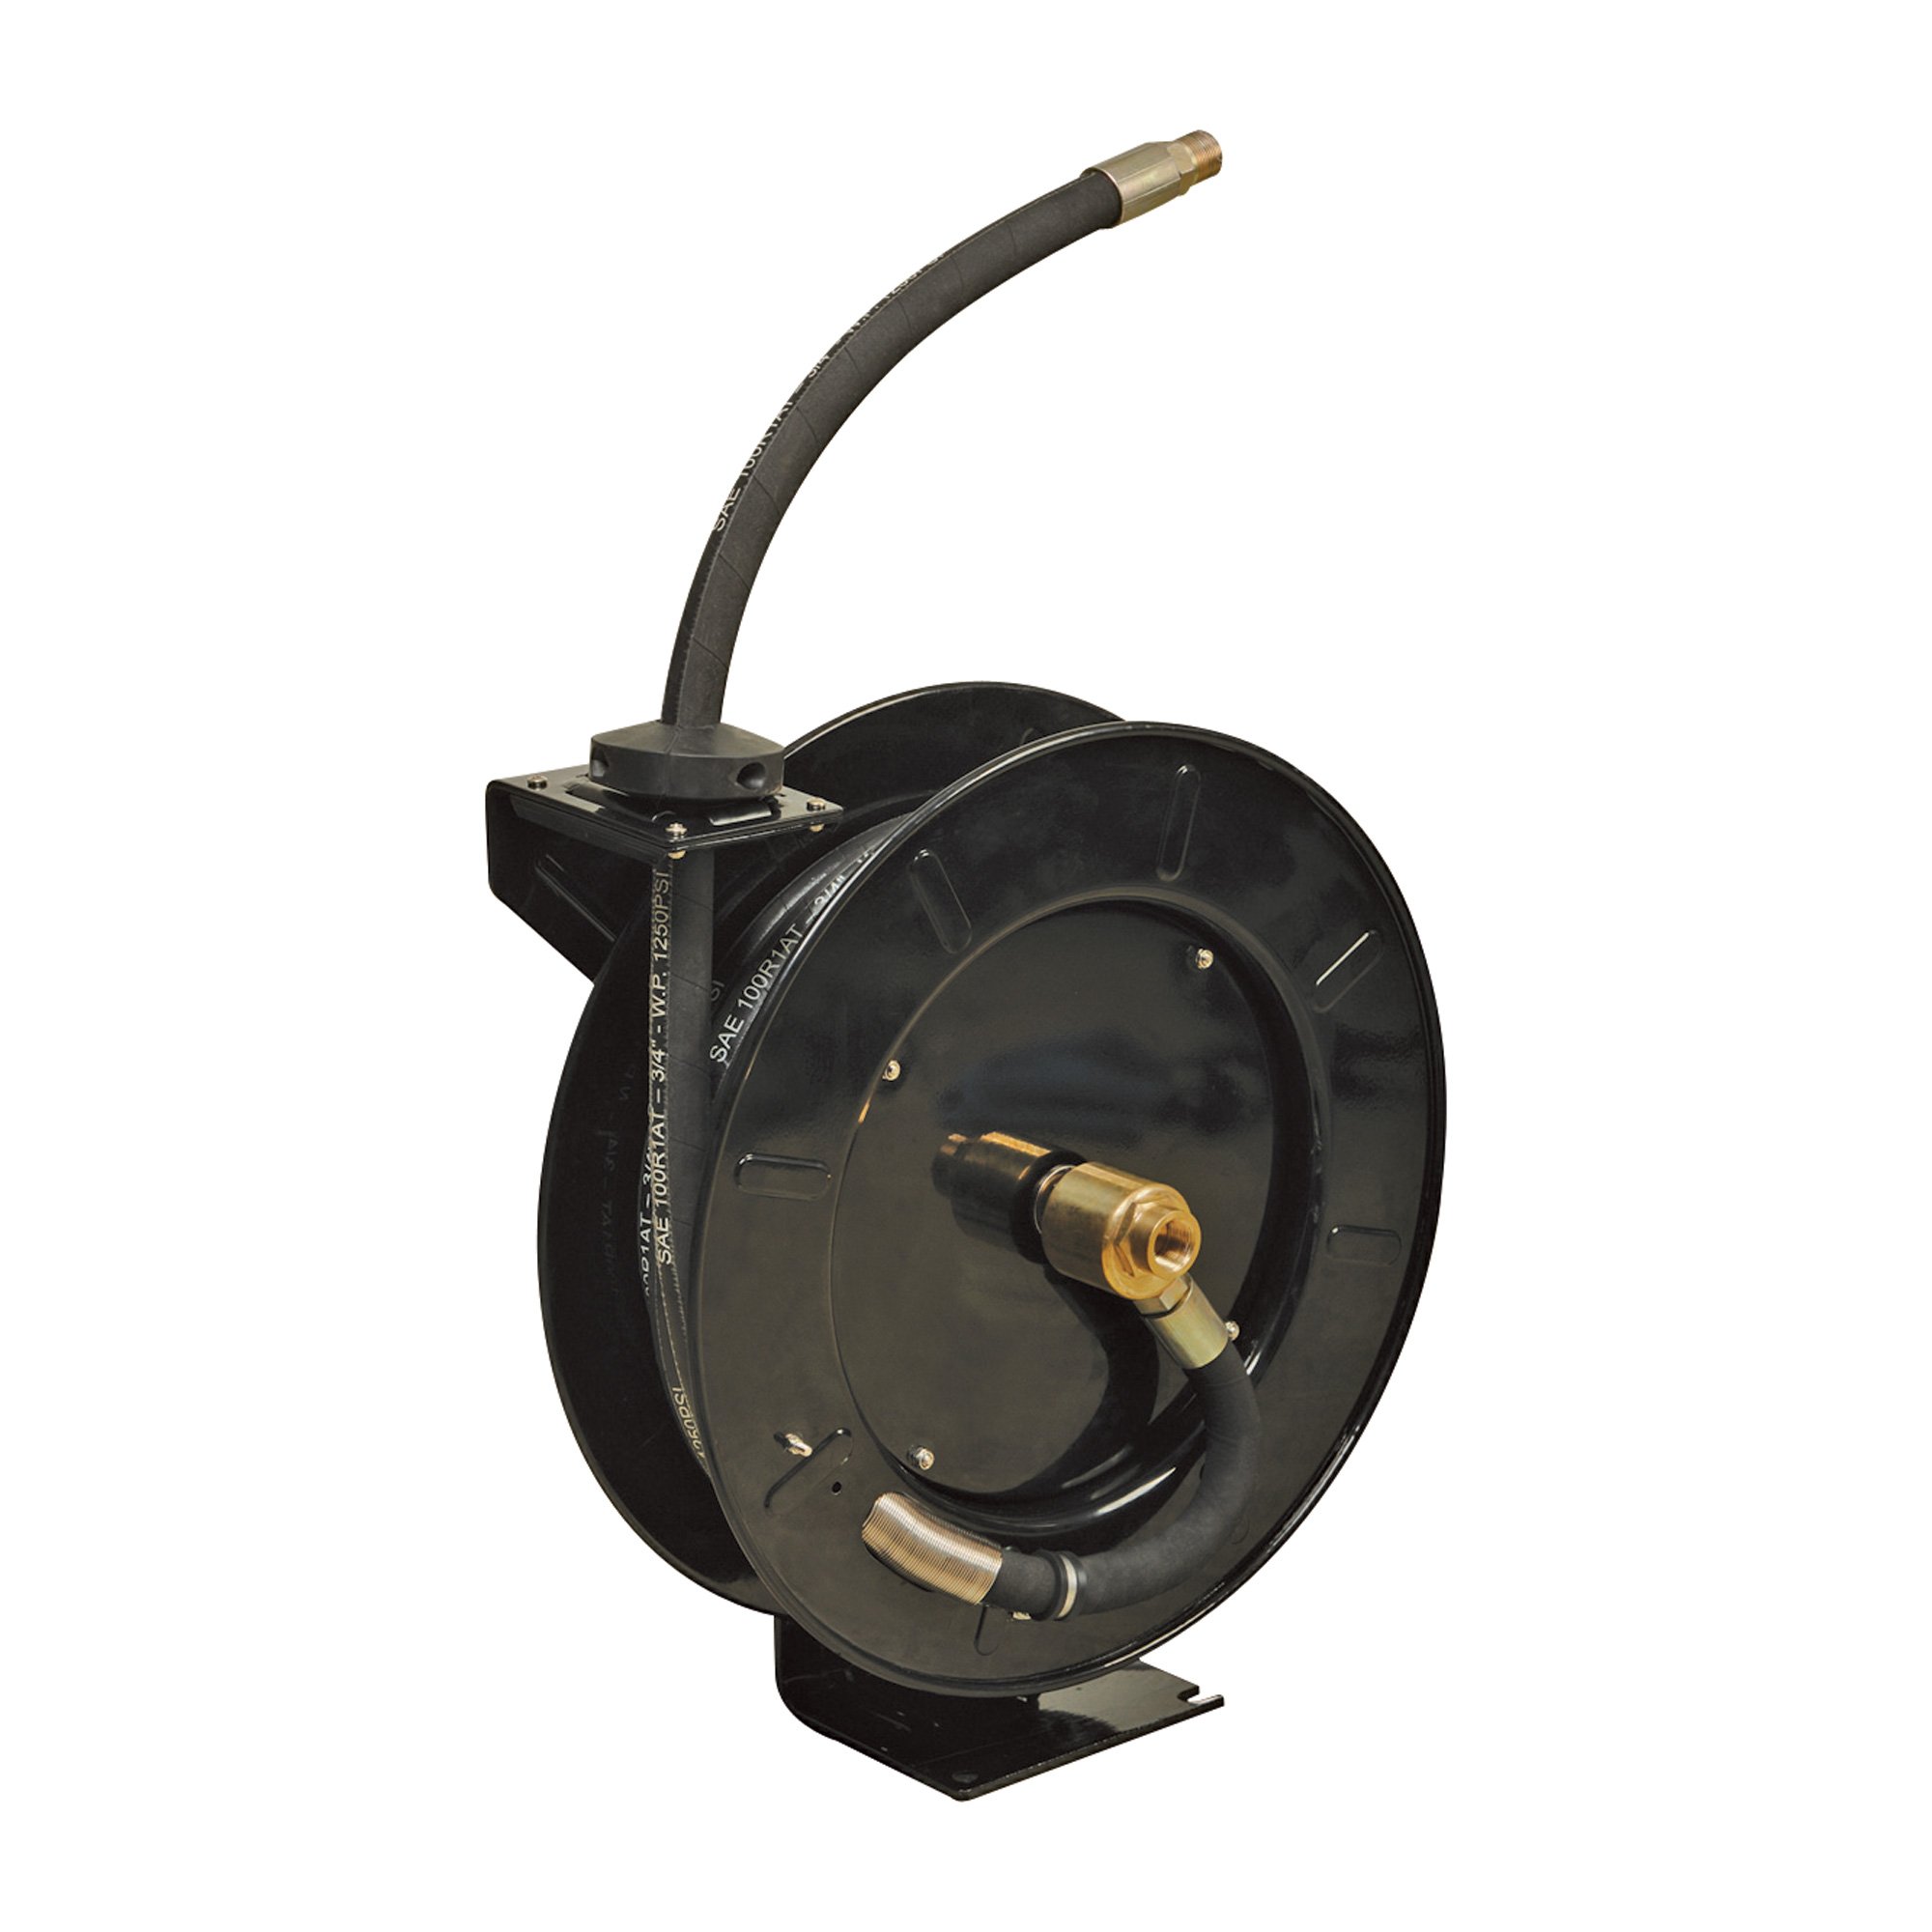 Please see replacement item# 28811. Reelworks Fuel Oil Hose Reel